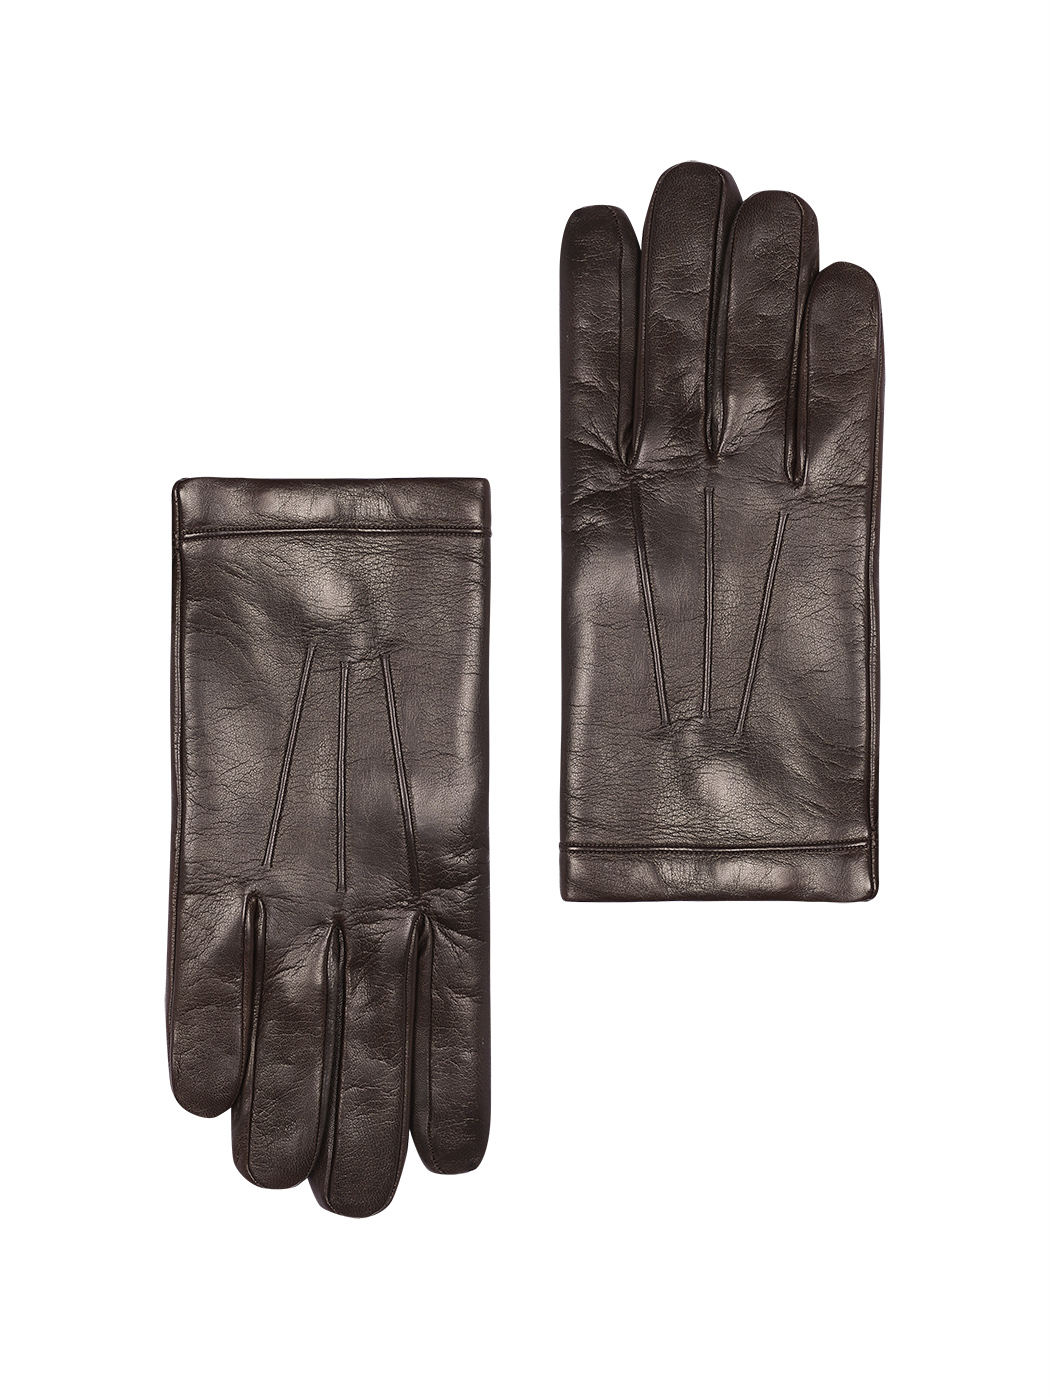 Men's Lined Gloves in Leather & Cashmere Brown